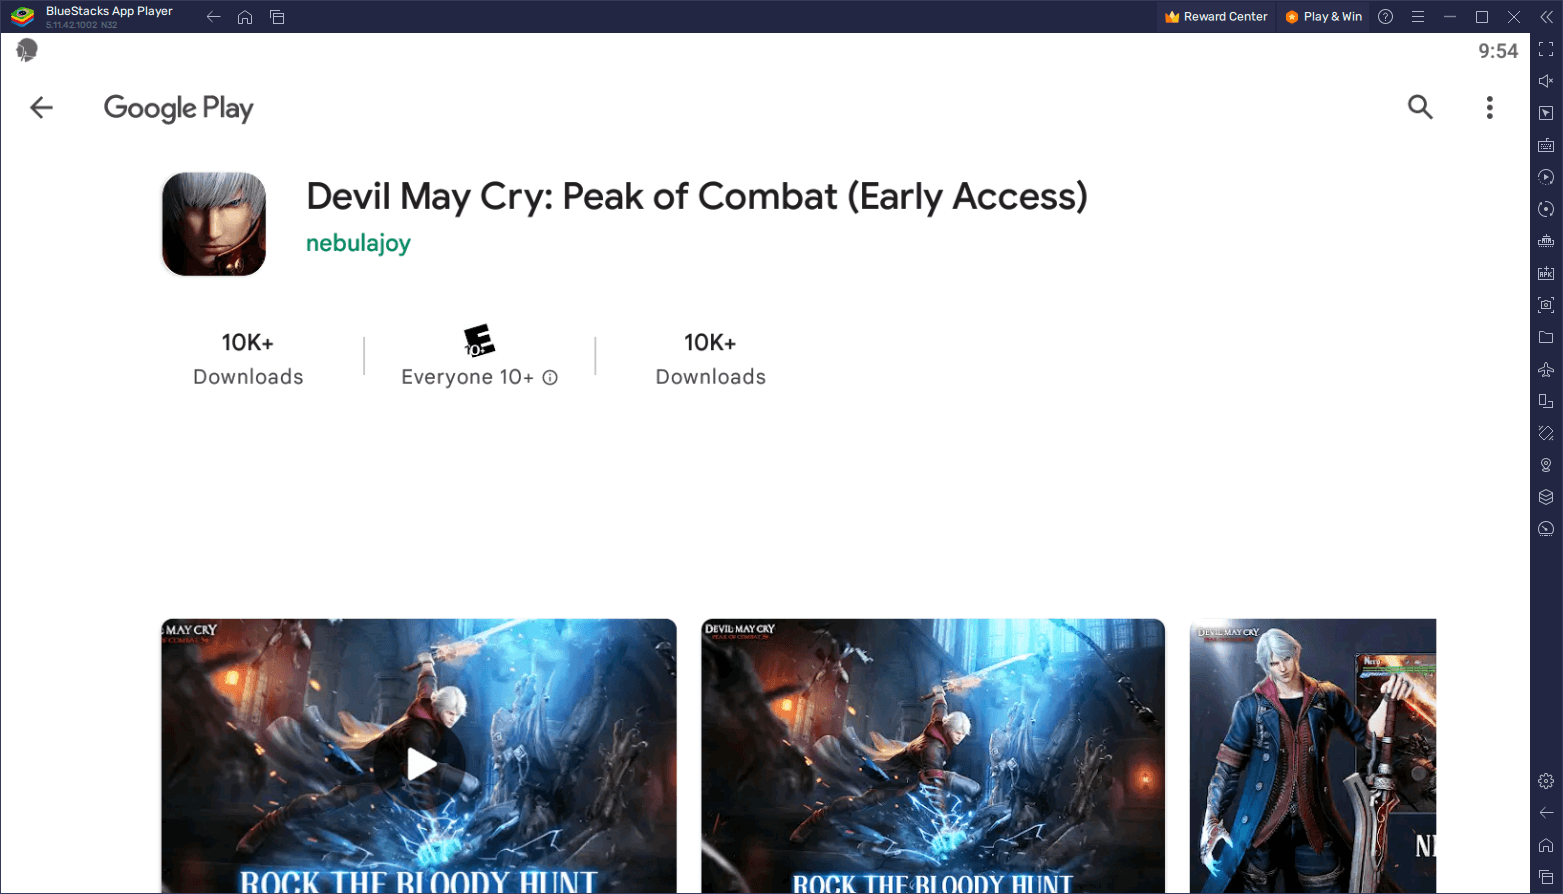 Devil May Cry : Peak of Combat Is Coming To PC